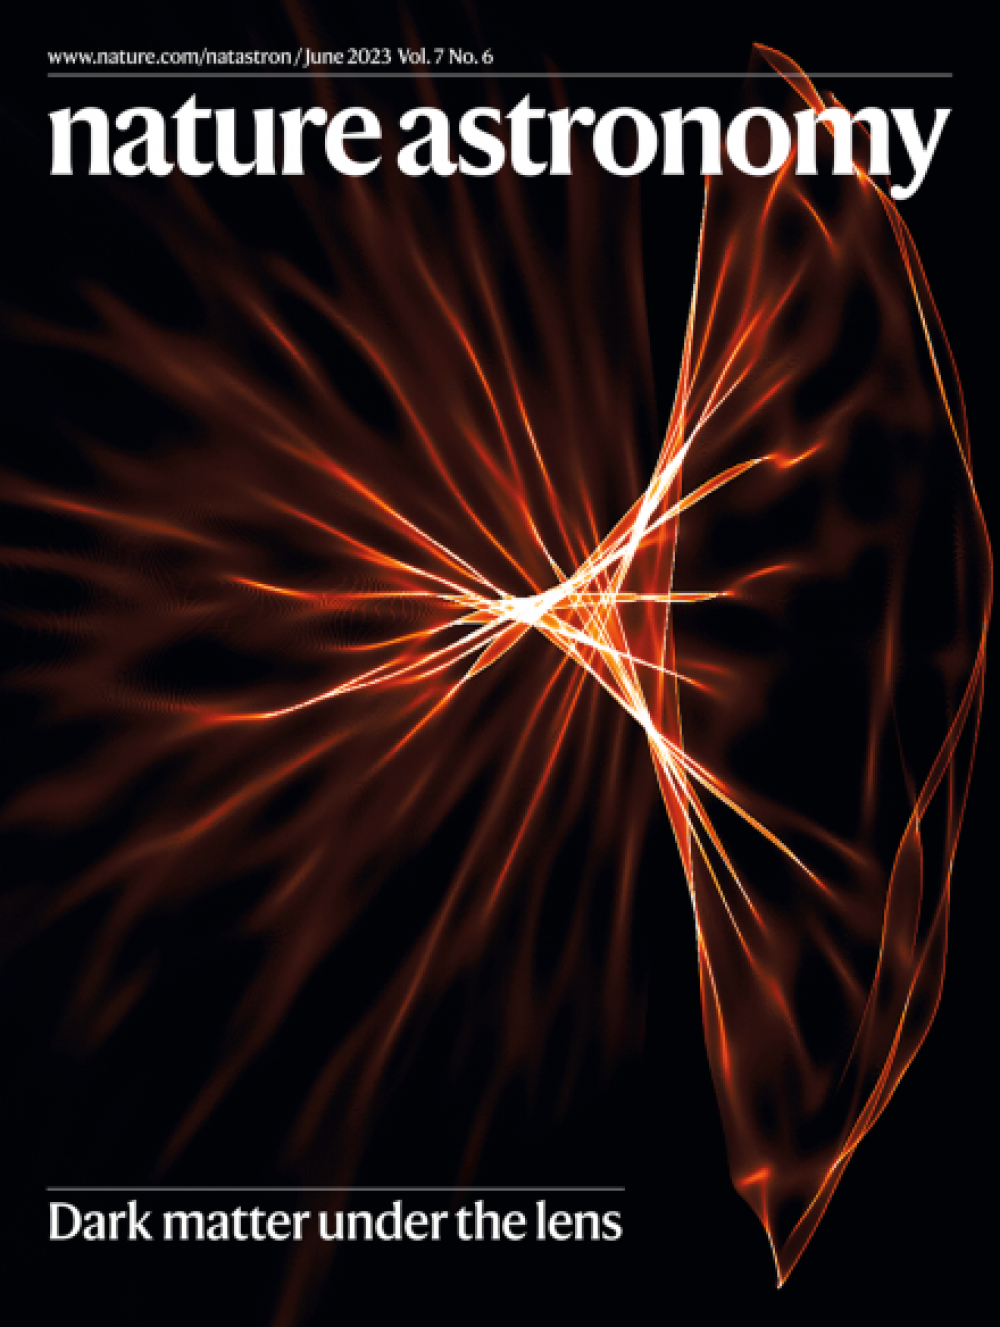 (Nature Astronomy) Alfred Amruth has the front cover of the Nature Astronomy